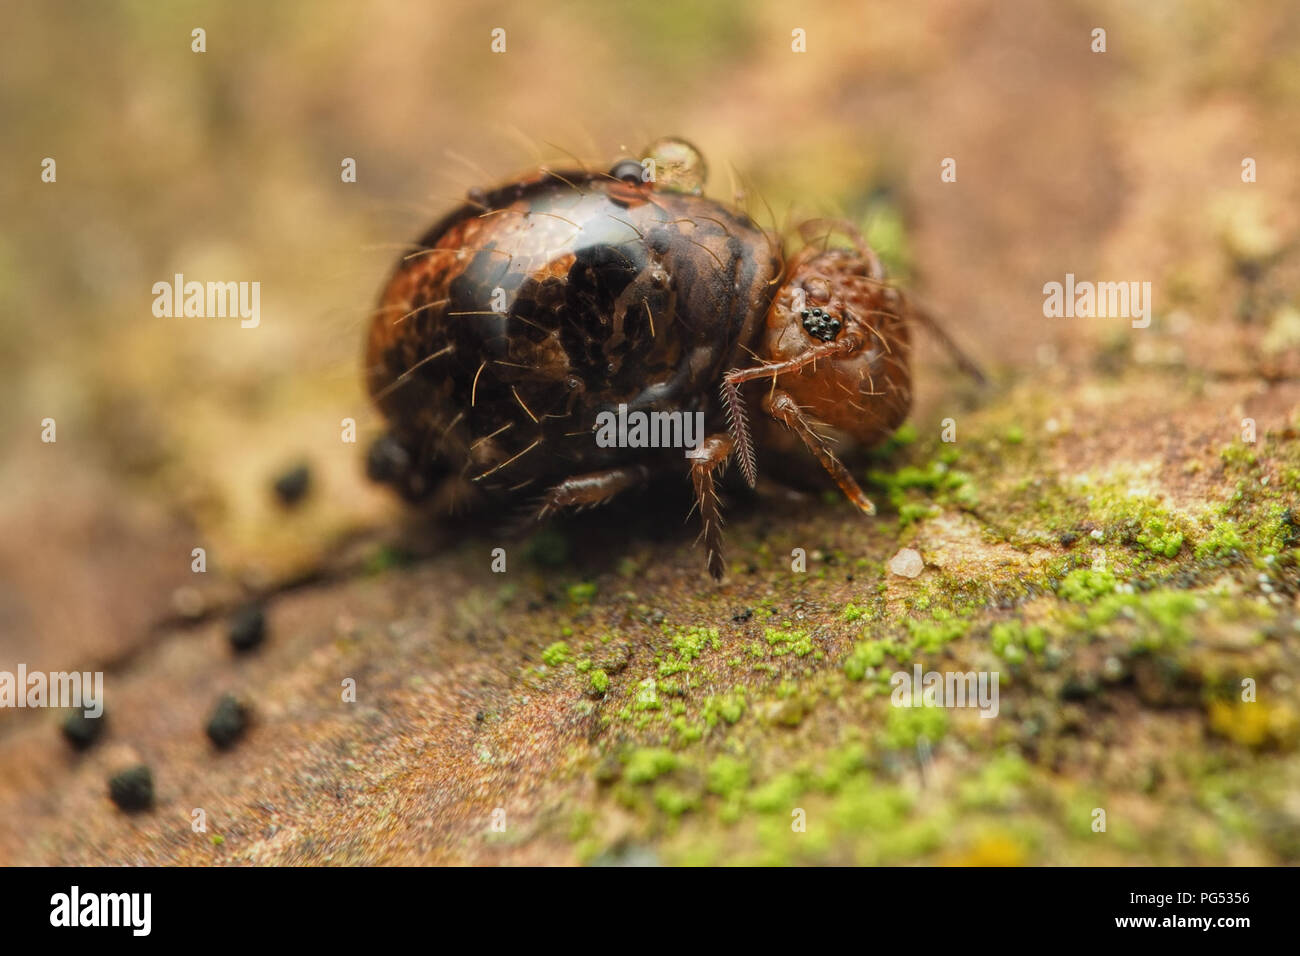 Globular Springtail (Allacma fusca) at rest on fallen branch with what looks like its droppings behind. Tipperary, Ireland Stock Photo